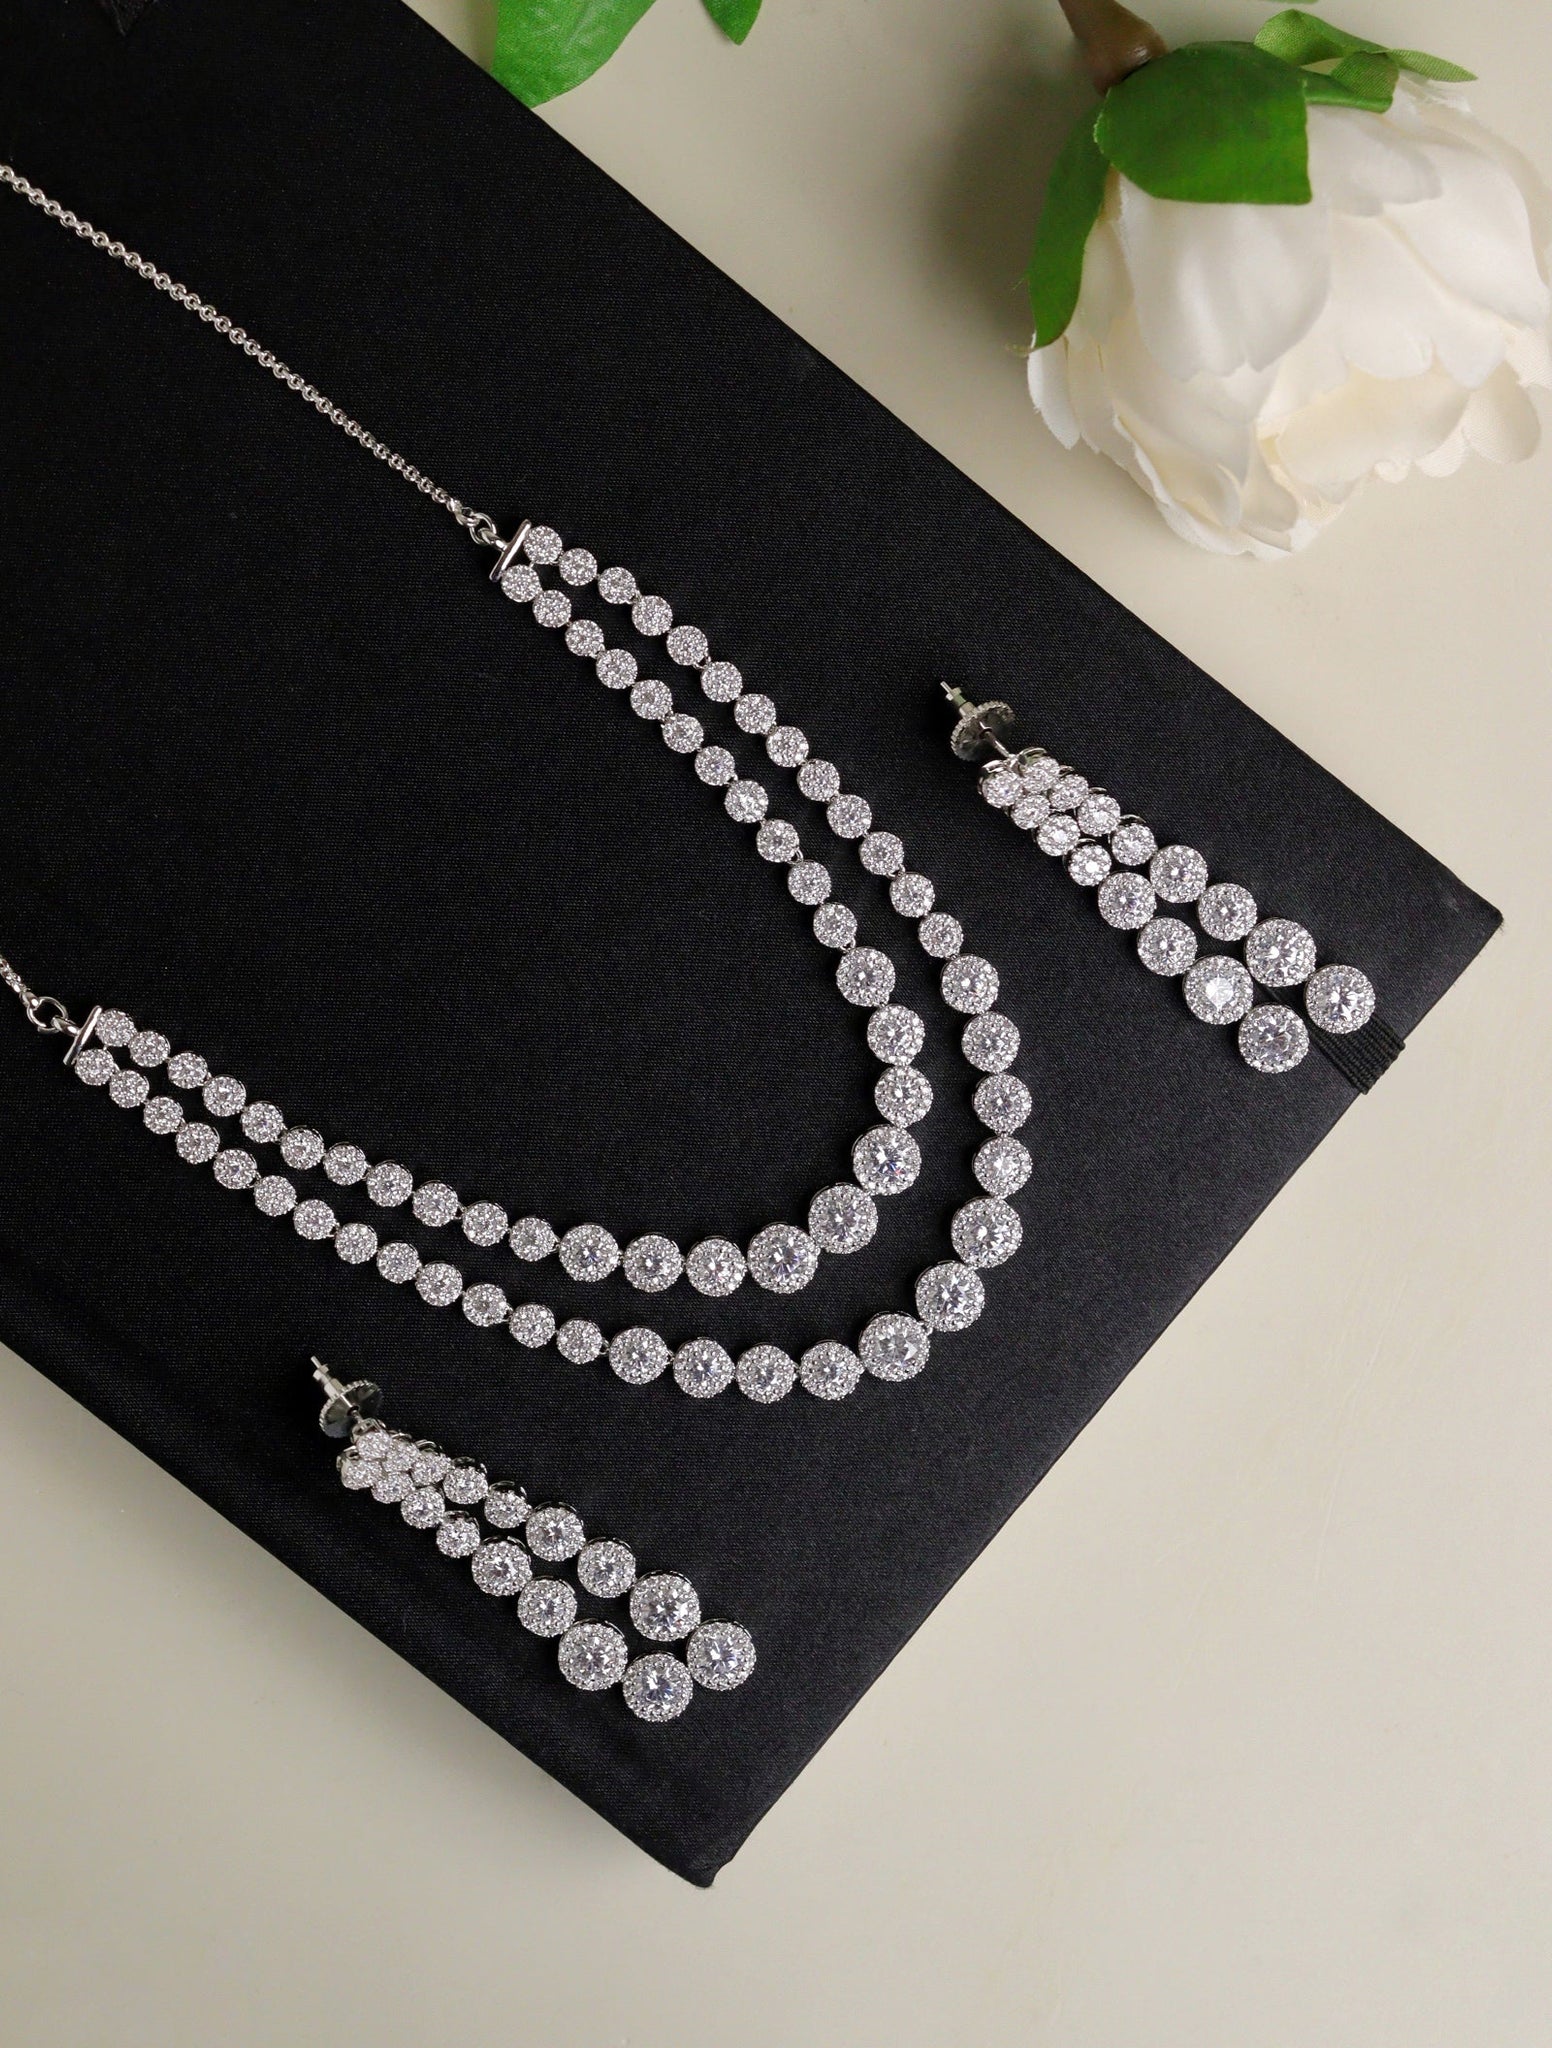 Shop Online Fida Necklace And Earring Set @ Best Price